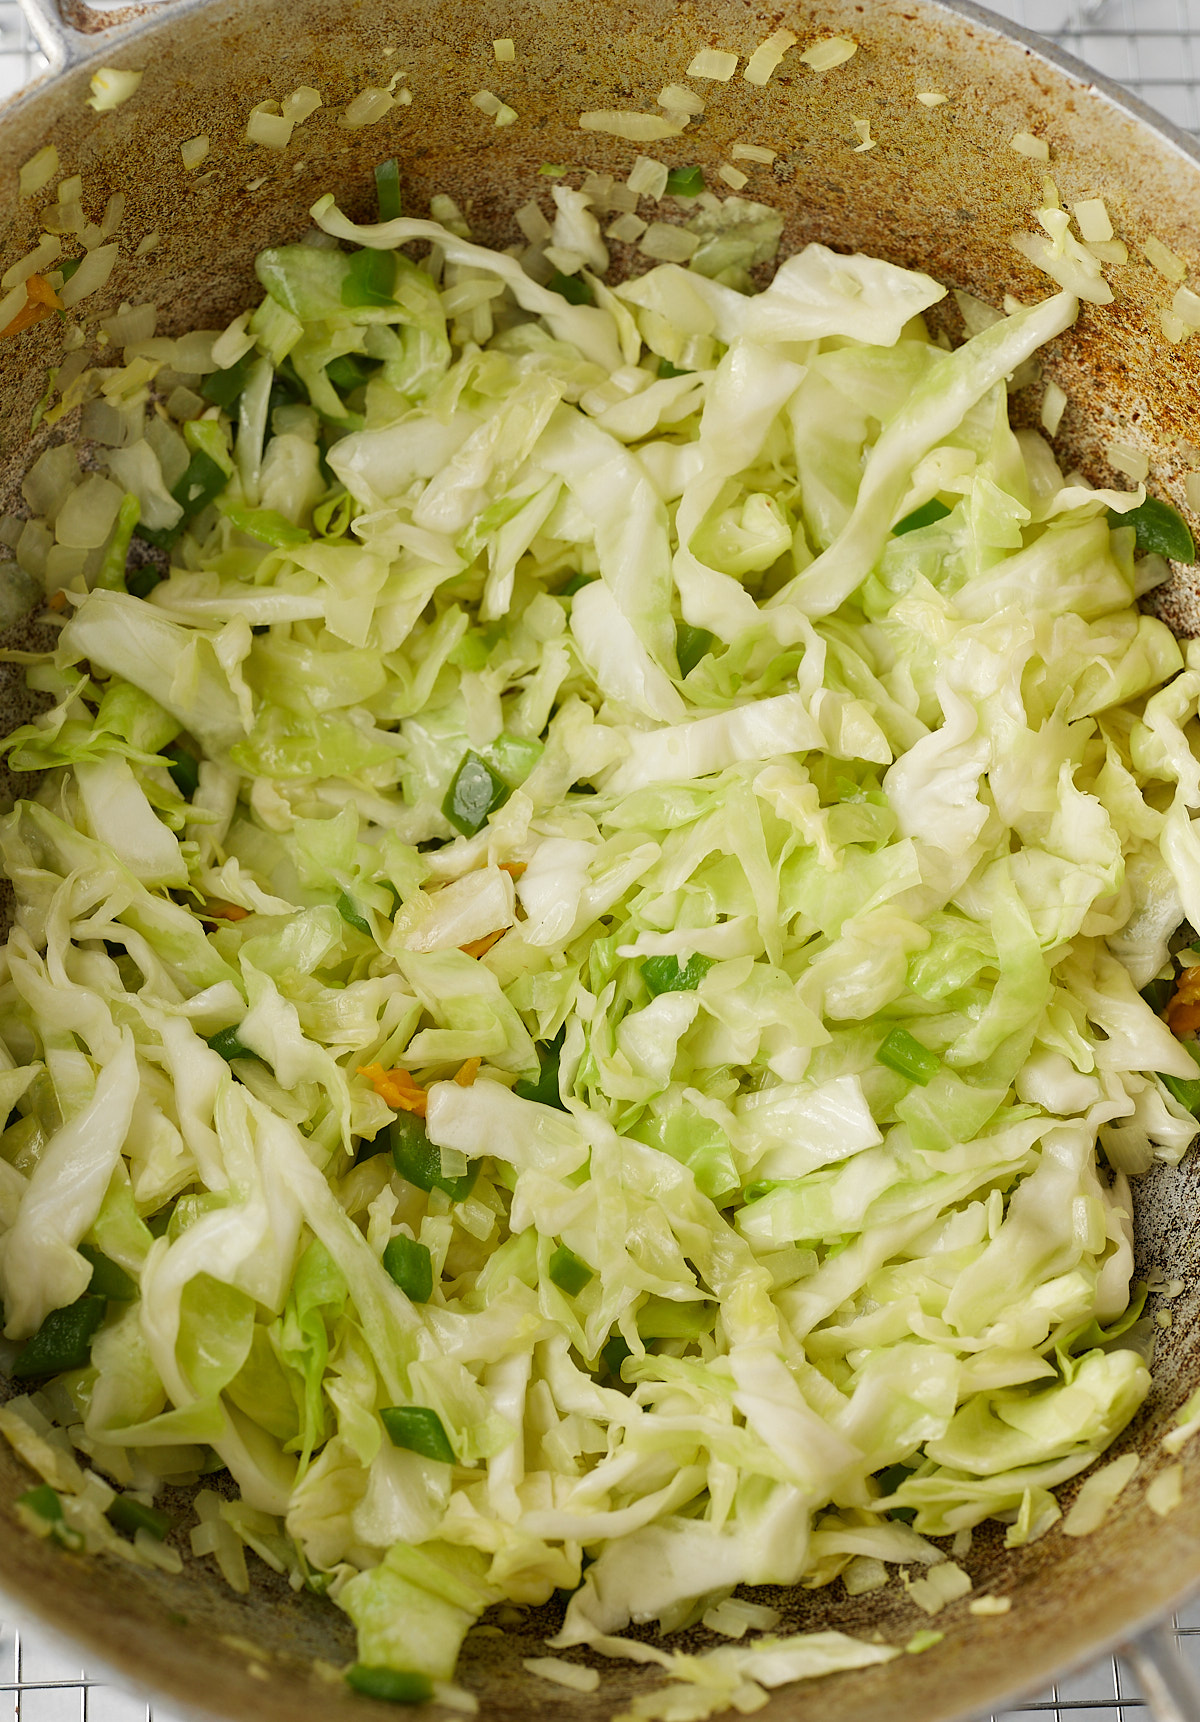 cabbage that has been cooked with bell peppers and onions